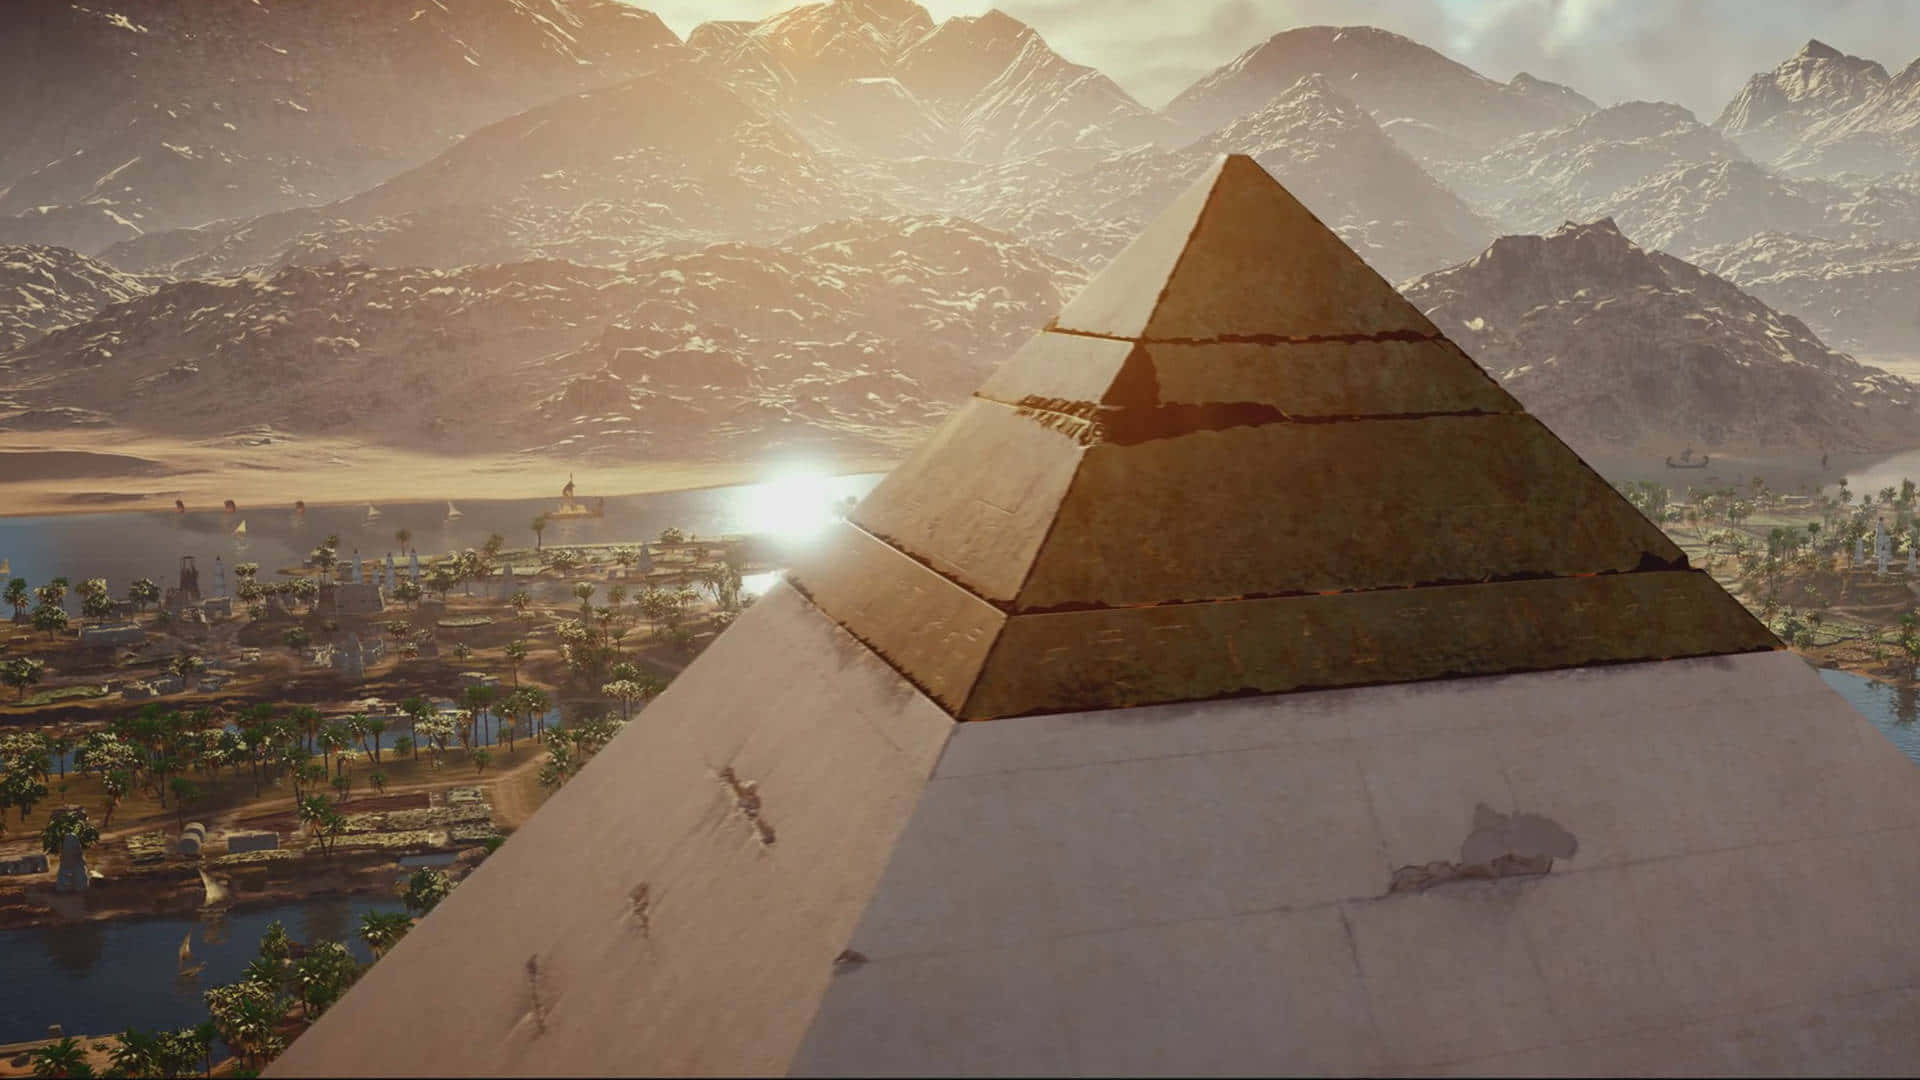 Great Pyramid Of Giza 1920x1080 Assassin's Creed Origins Background